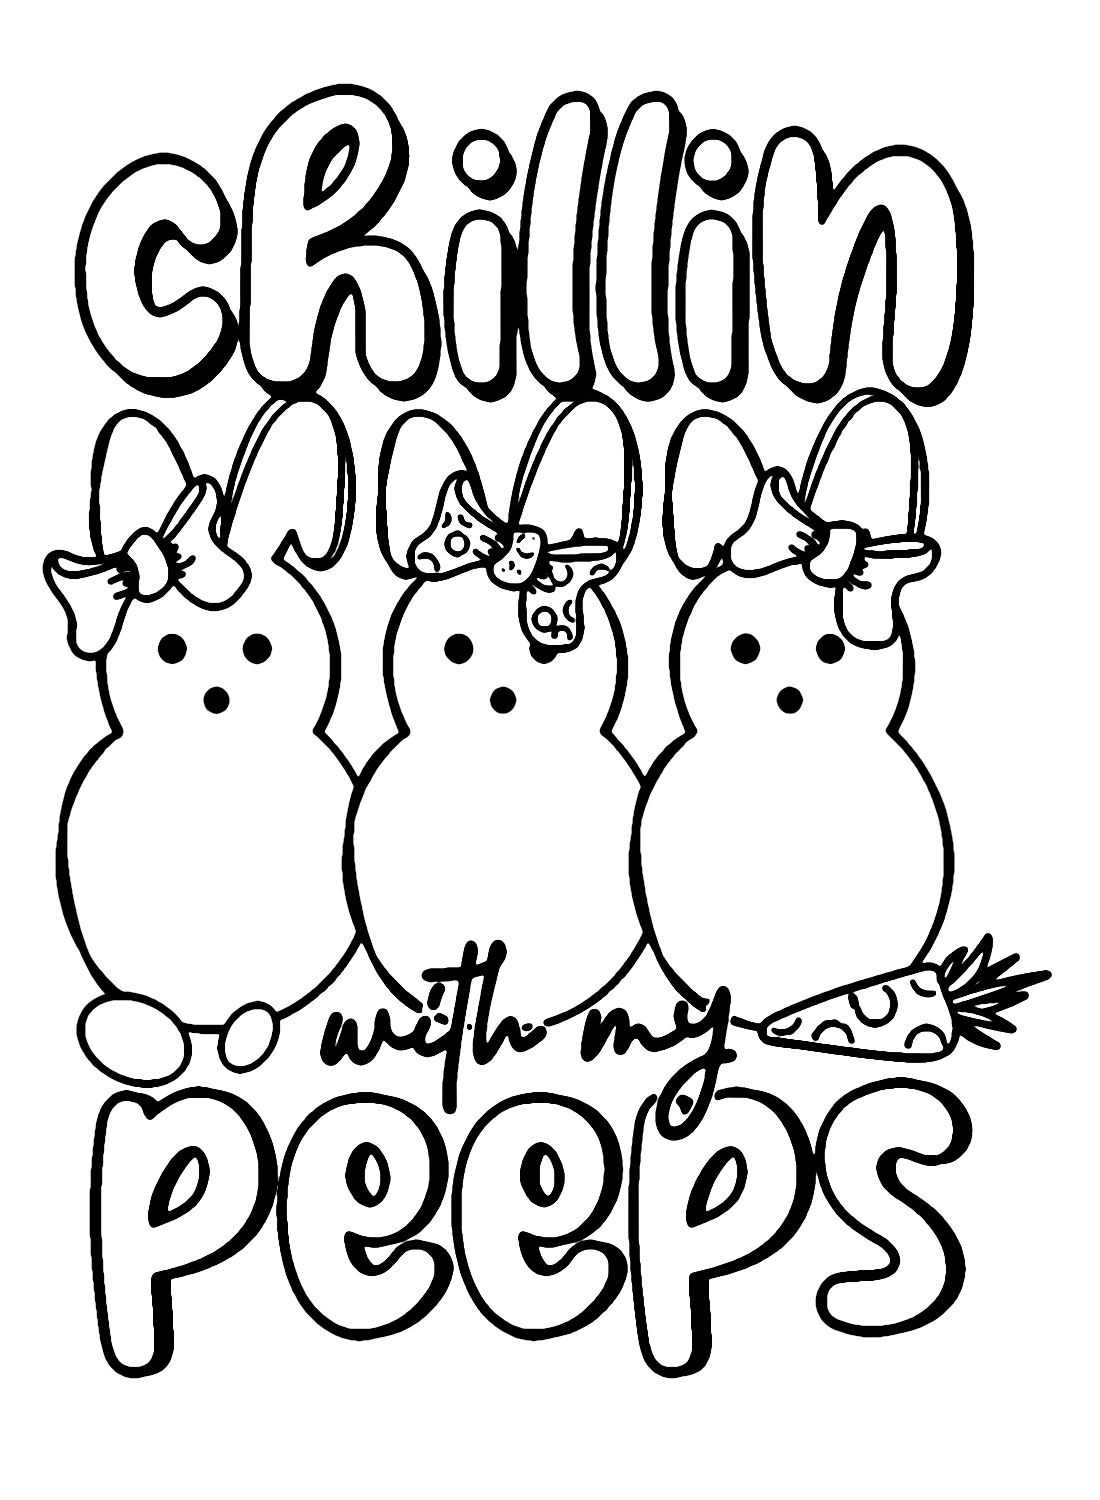 Marshmallow Peeps for Kids Coloring Page